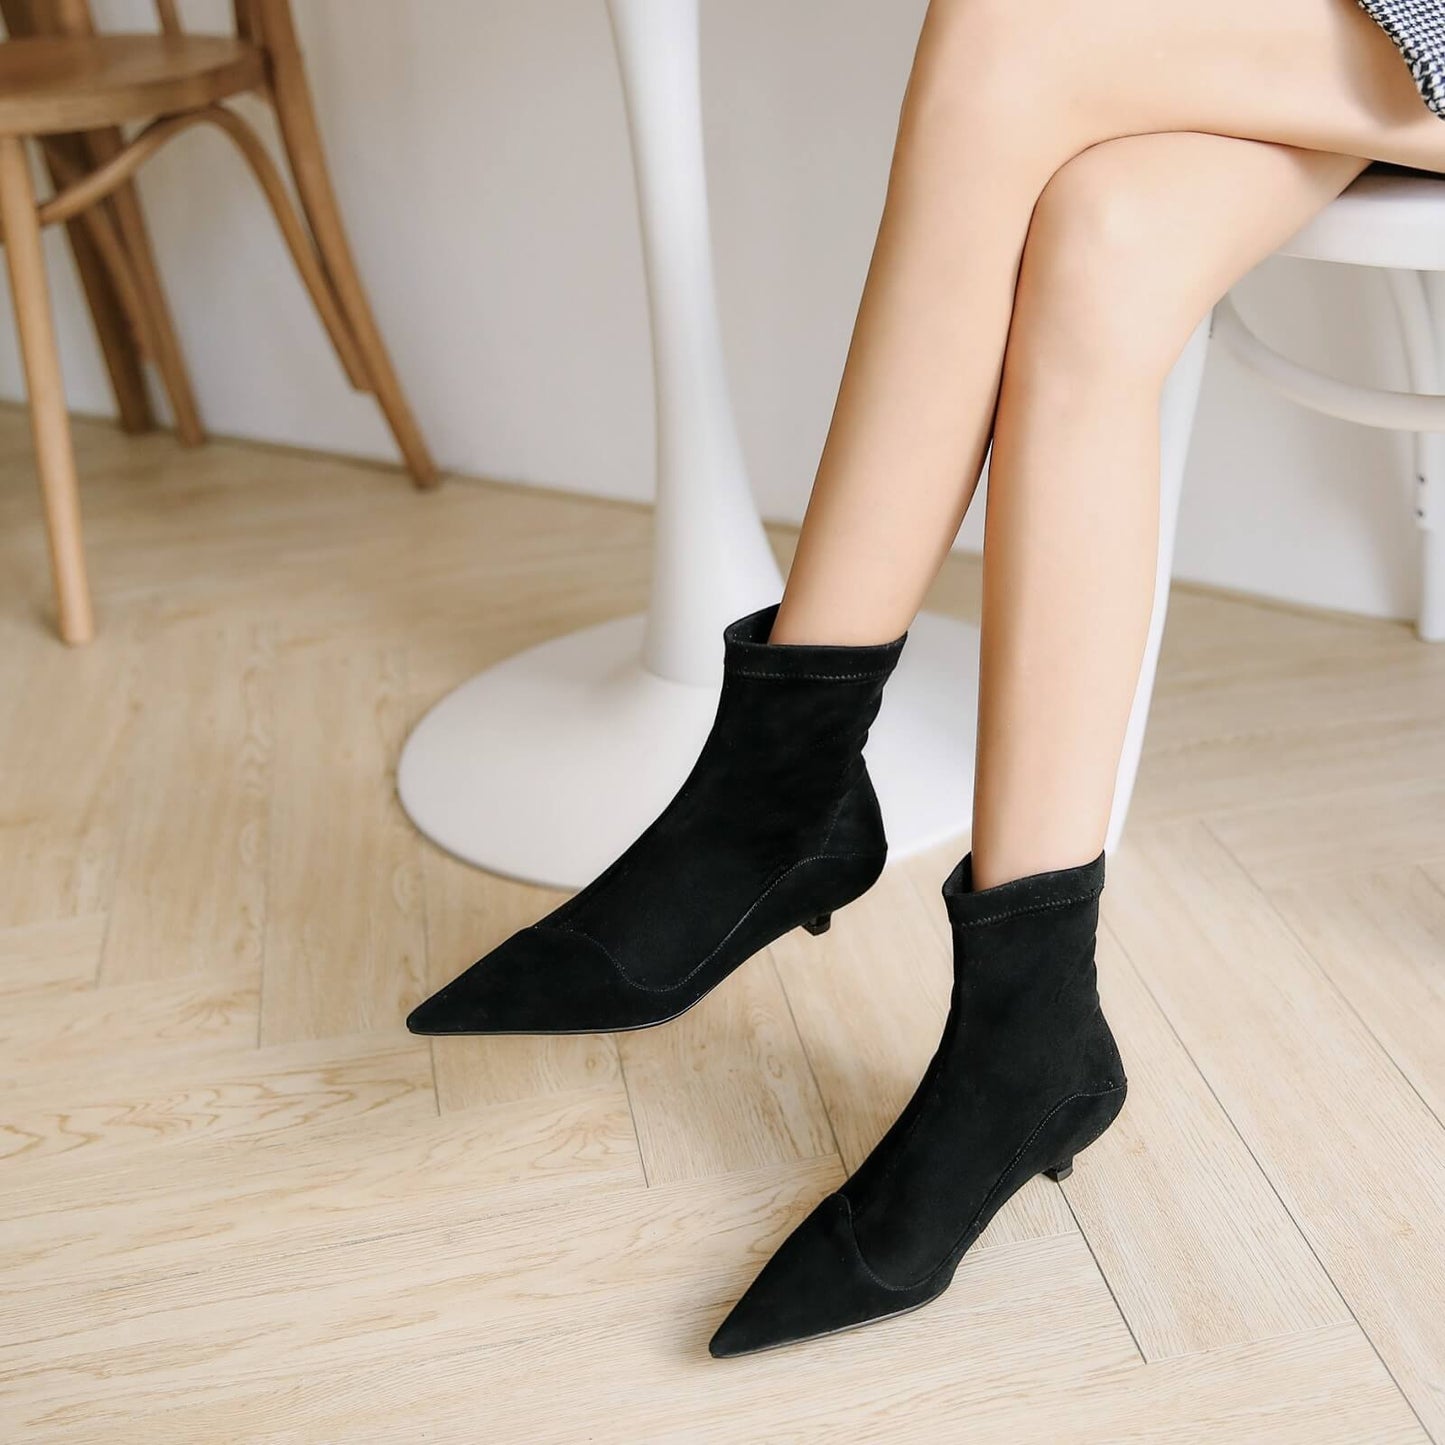 Kaly-Kitten-Heels-Pointed-Toe-Stitching-Vamp-Black-Ankle-Boots-Suede-Model